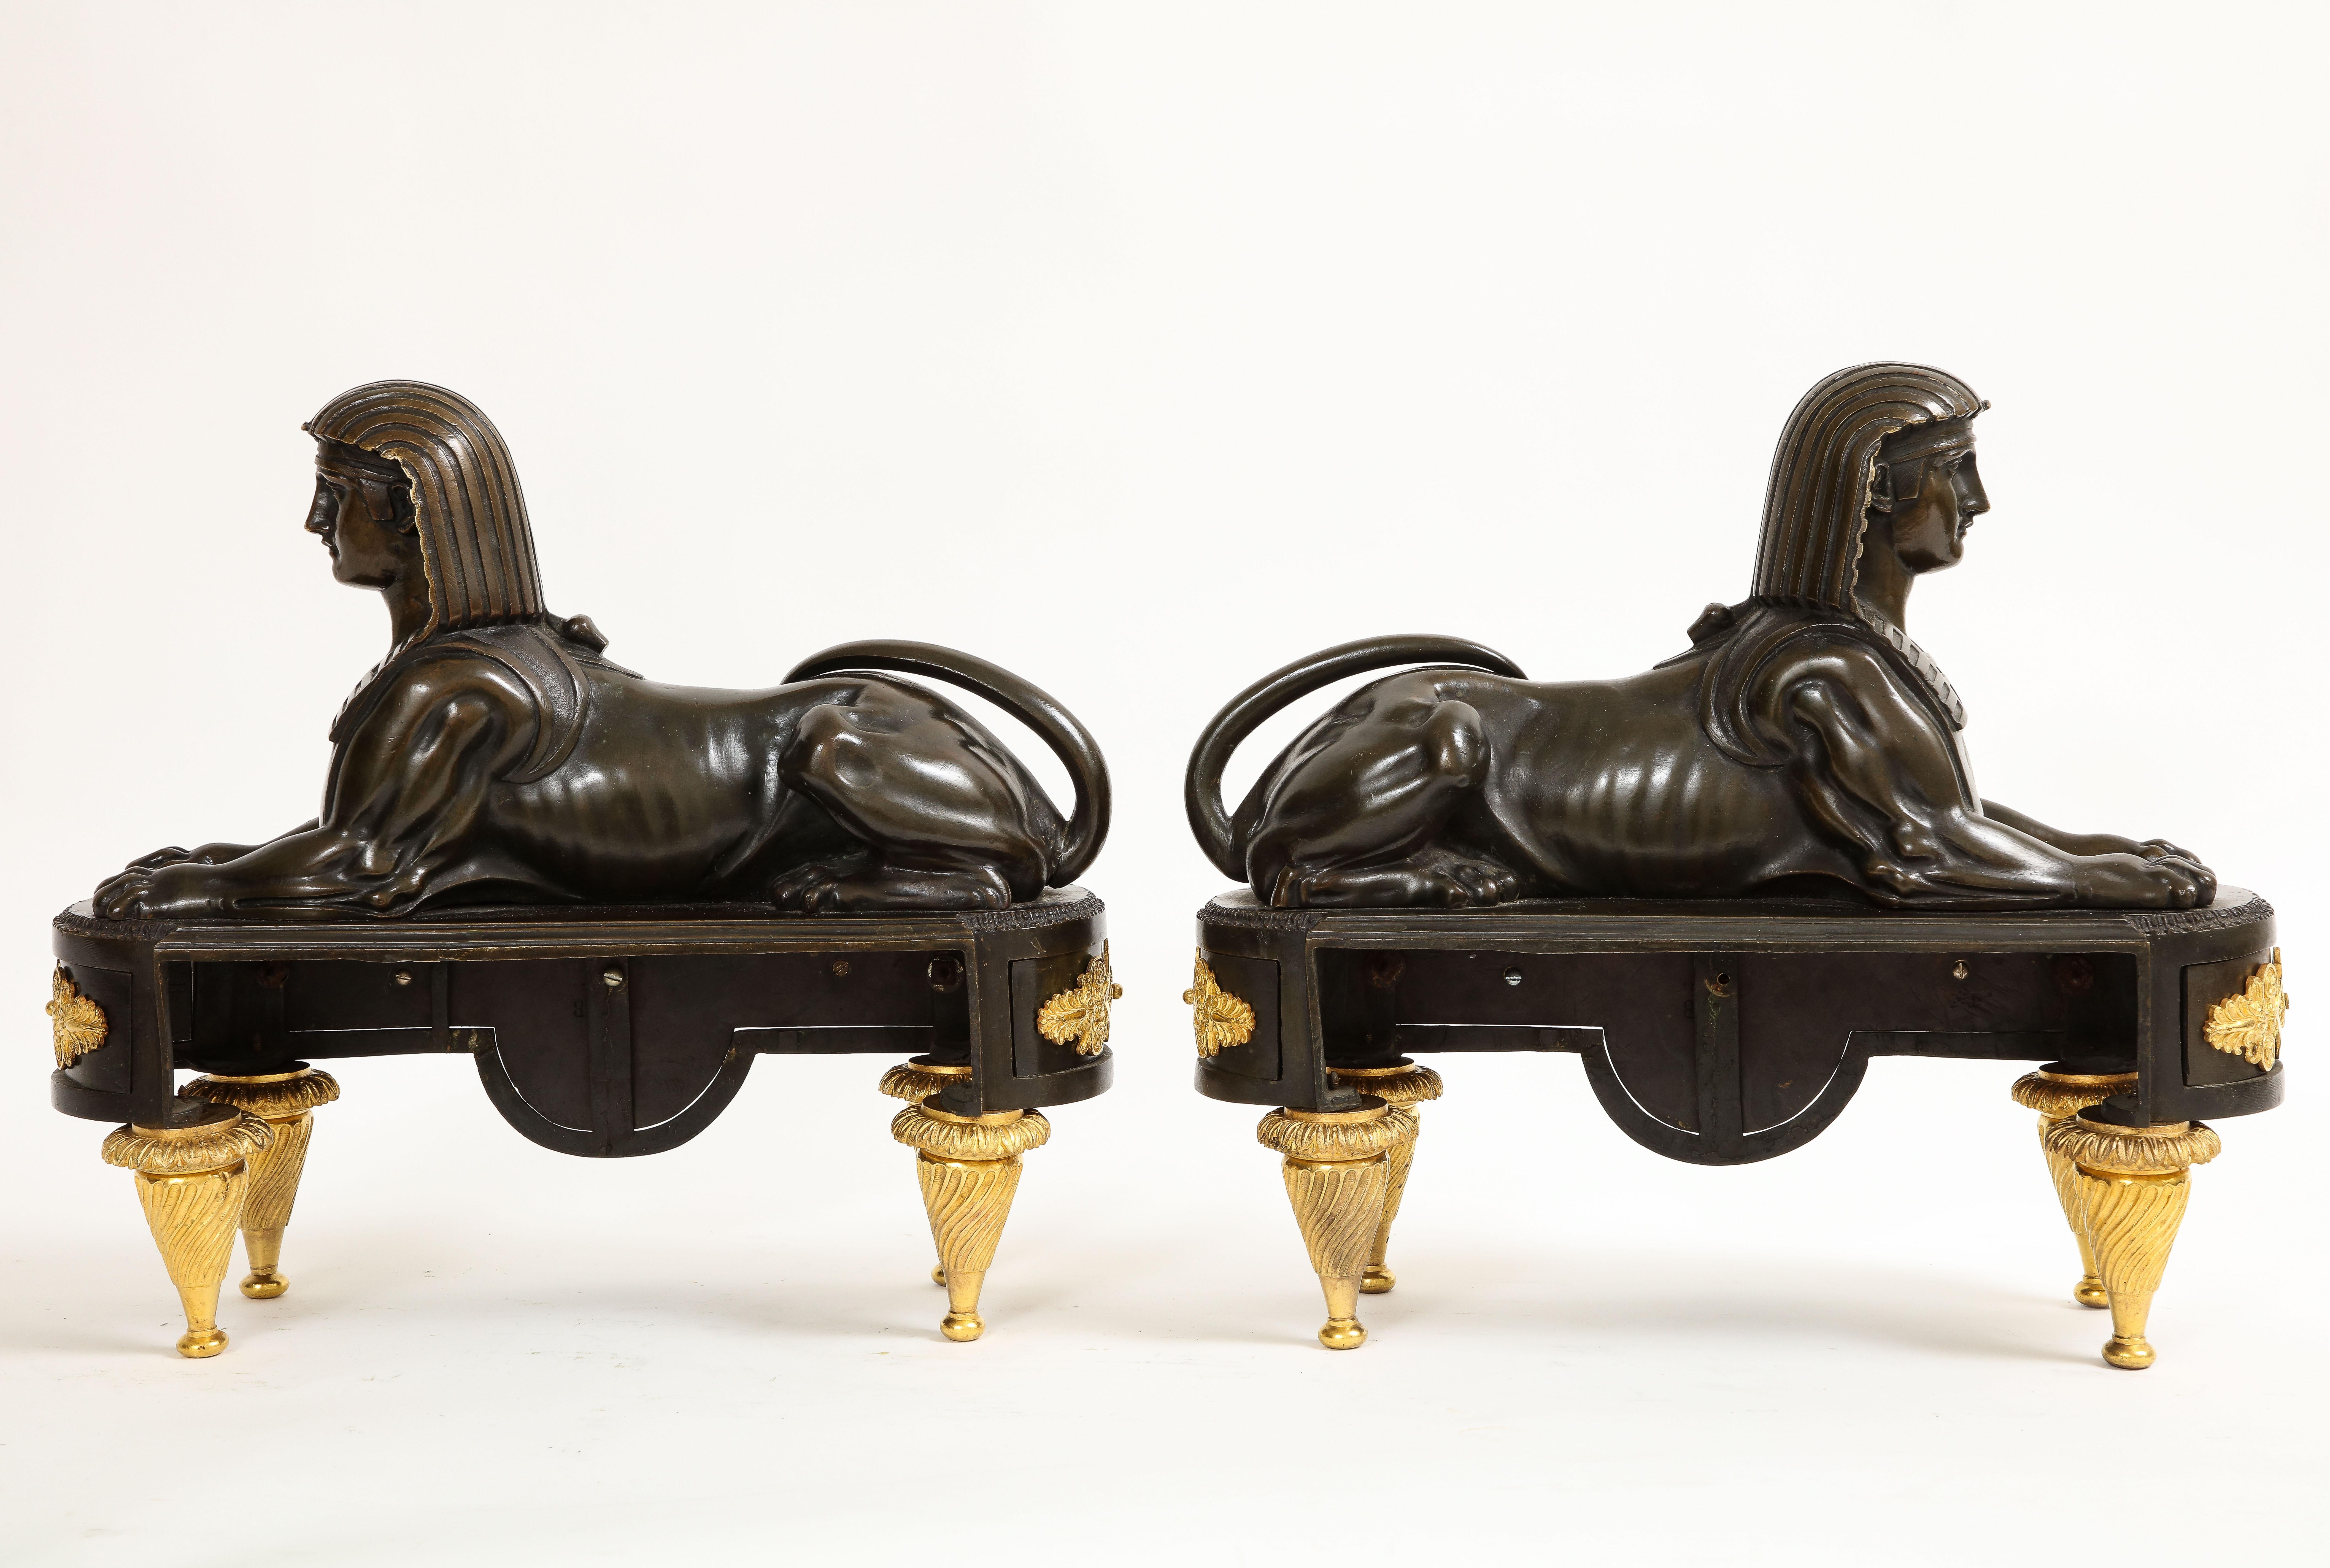 Pair of French Early 19th C. Patinated and Dore Bronze Egyptian Revival Chenets For Sale 4